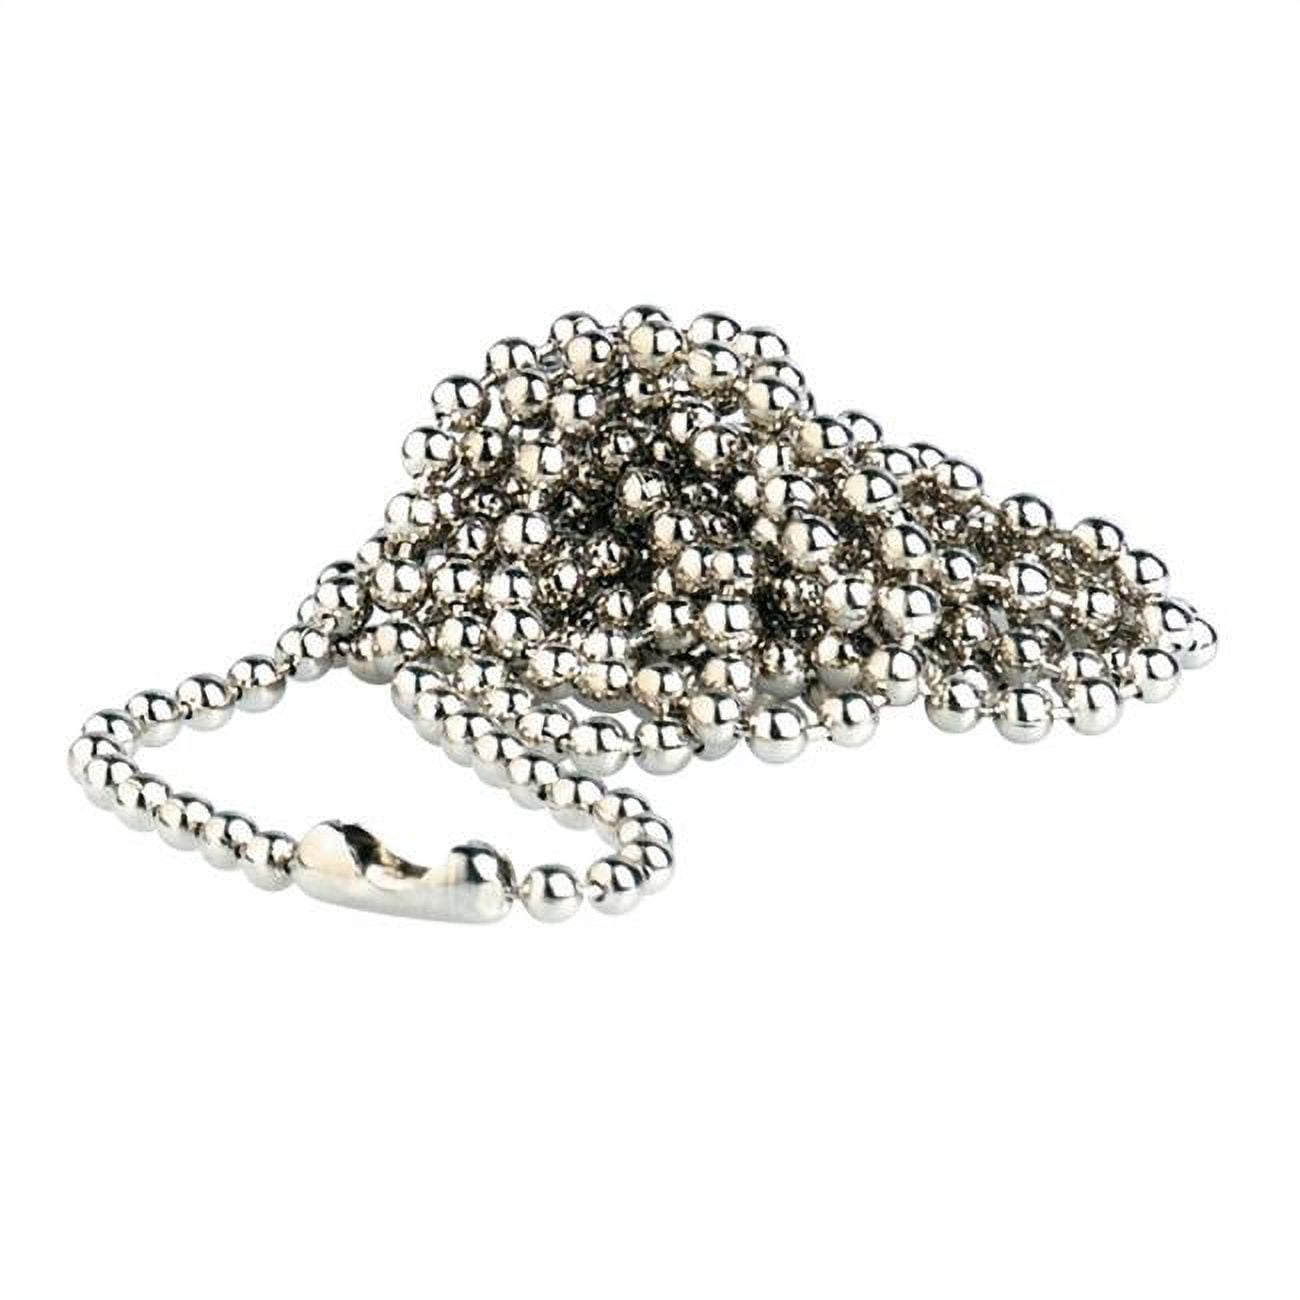 Metal Chain Lanyards 30 Other Metal Chain 100 Pack Chrome (69130)